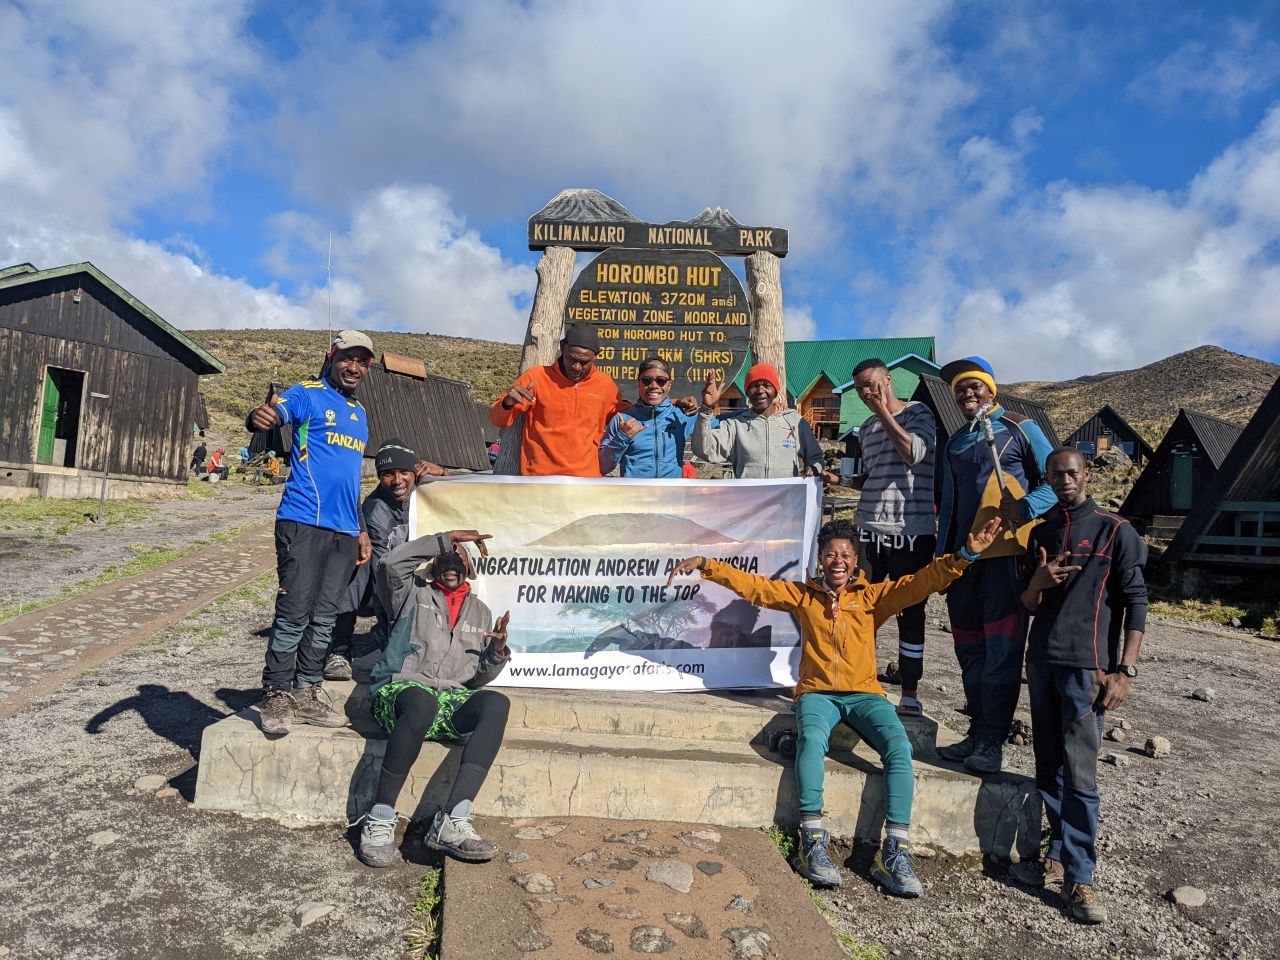 In December 2021, King climbed Mt. Kilimanjaro in Tanzania for the second time (pictured) and brought other Black climbers with him. "I don't want to stand on a mountain and be the only one in the photo," King says. "I'd like it to be a diverse photo with a collective rainbow of individuals, breaking through the glass ceiling."